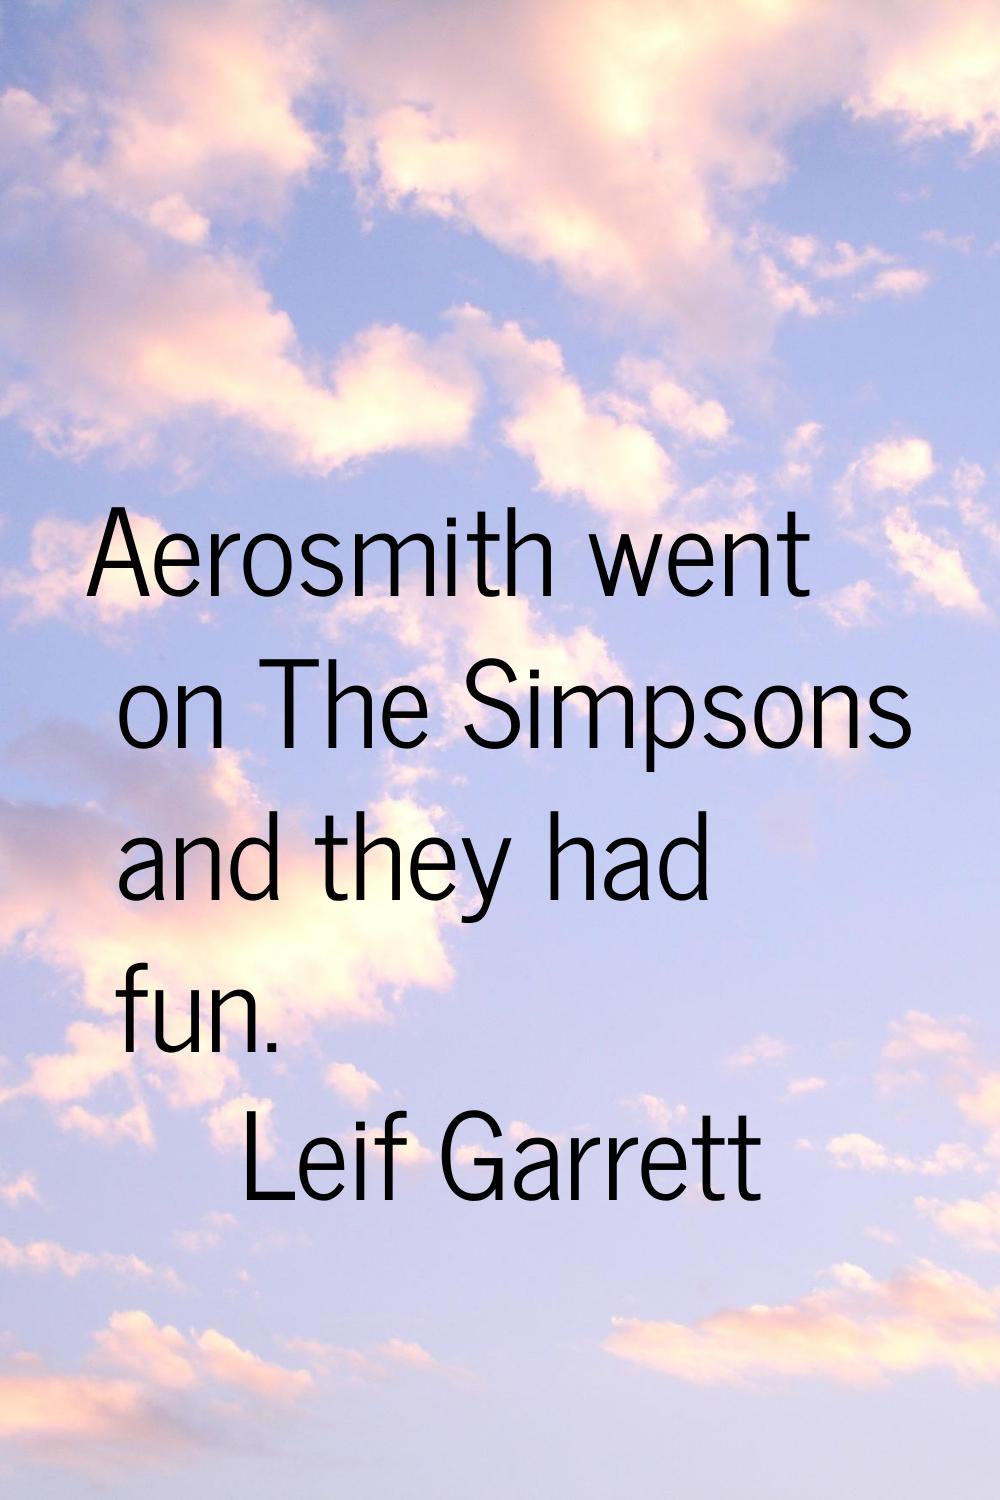 Aerosmith went on The Simpsons and they had fun.